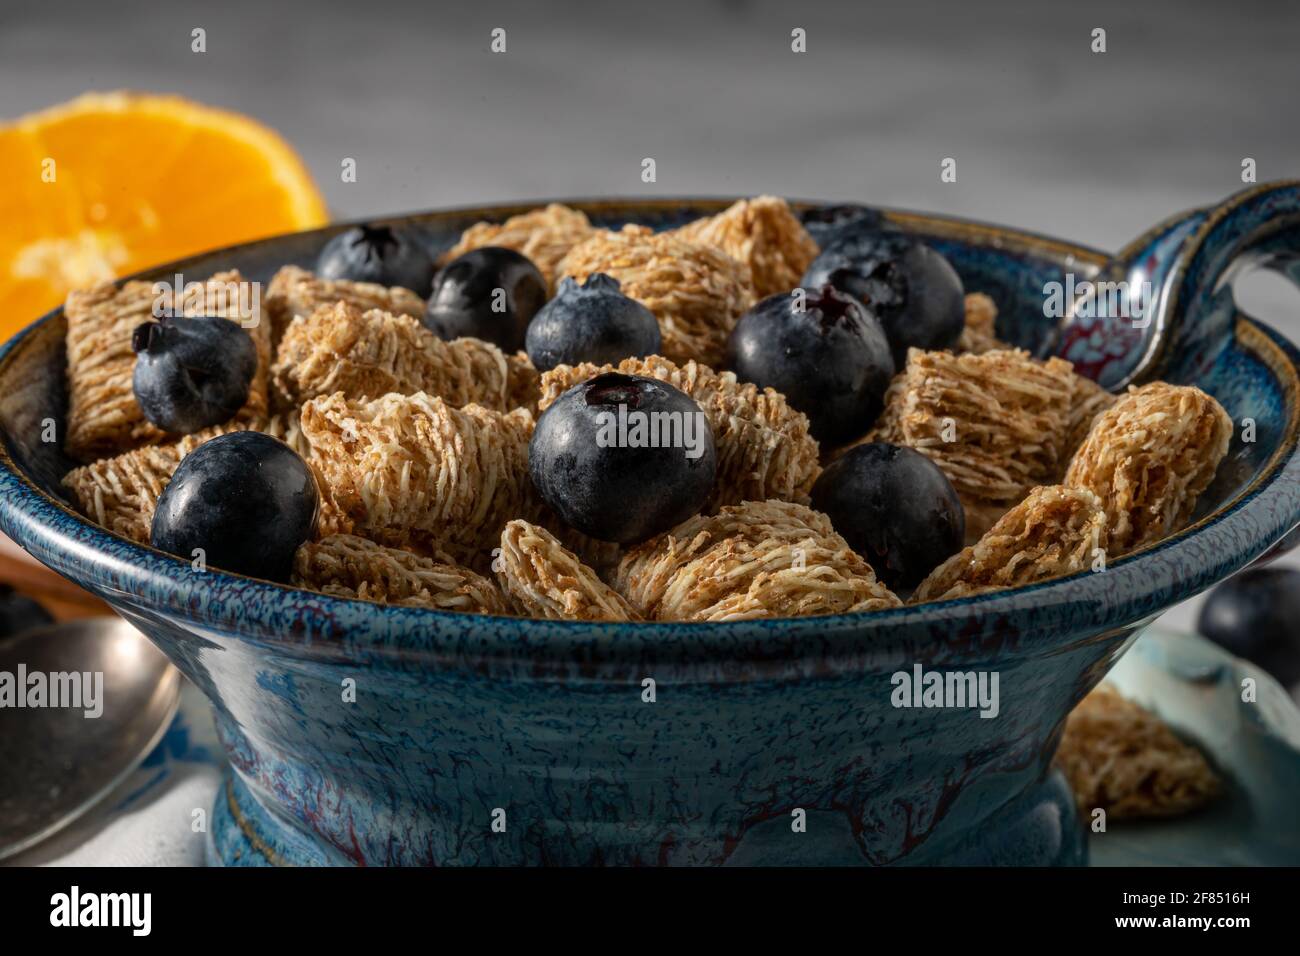 Shredded wheat biscuits with cinnamon and blueberries in almond milk. Stock Photo